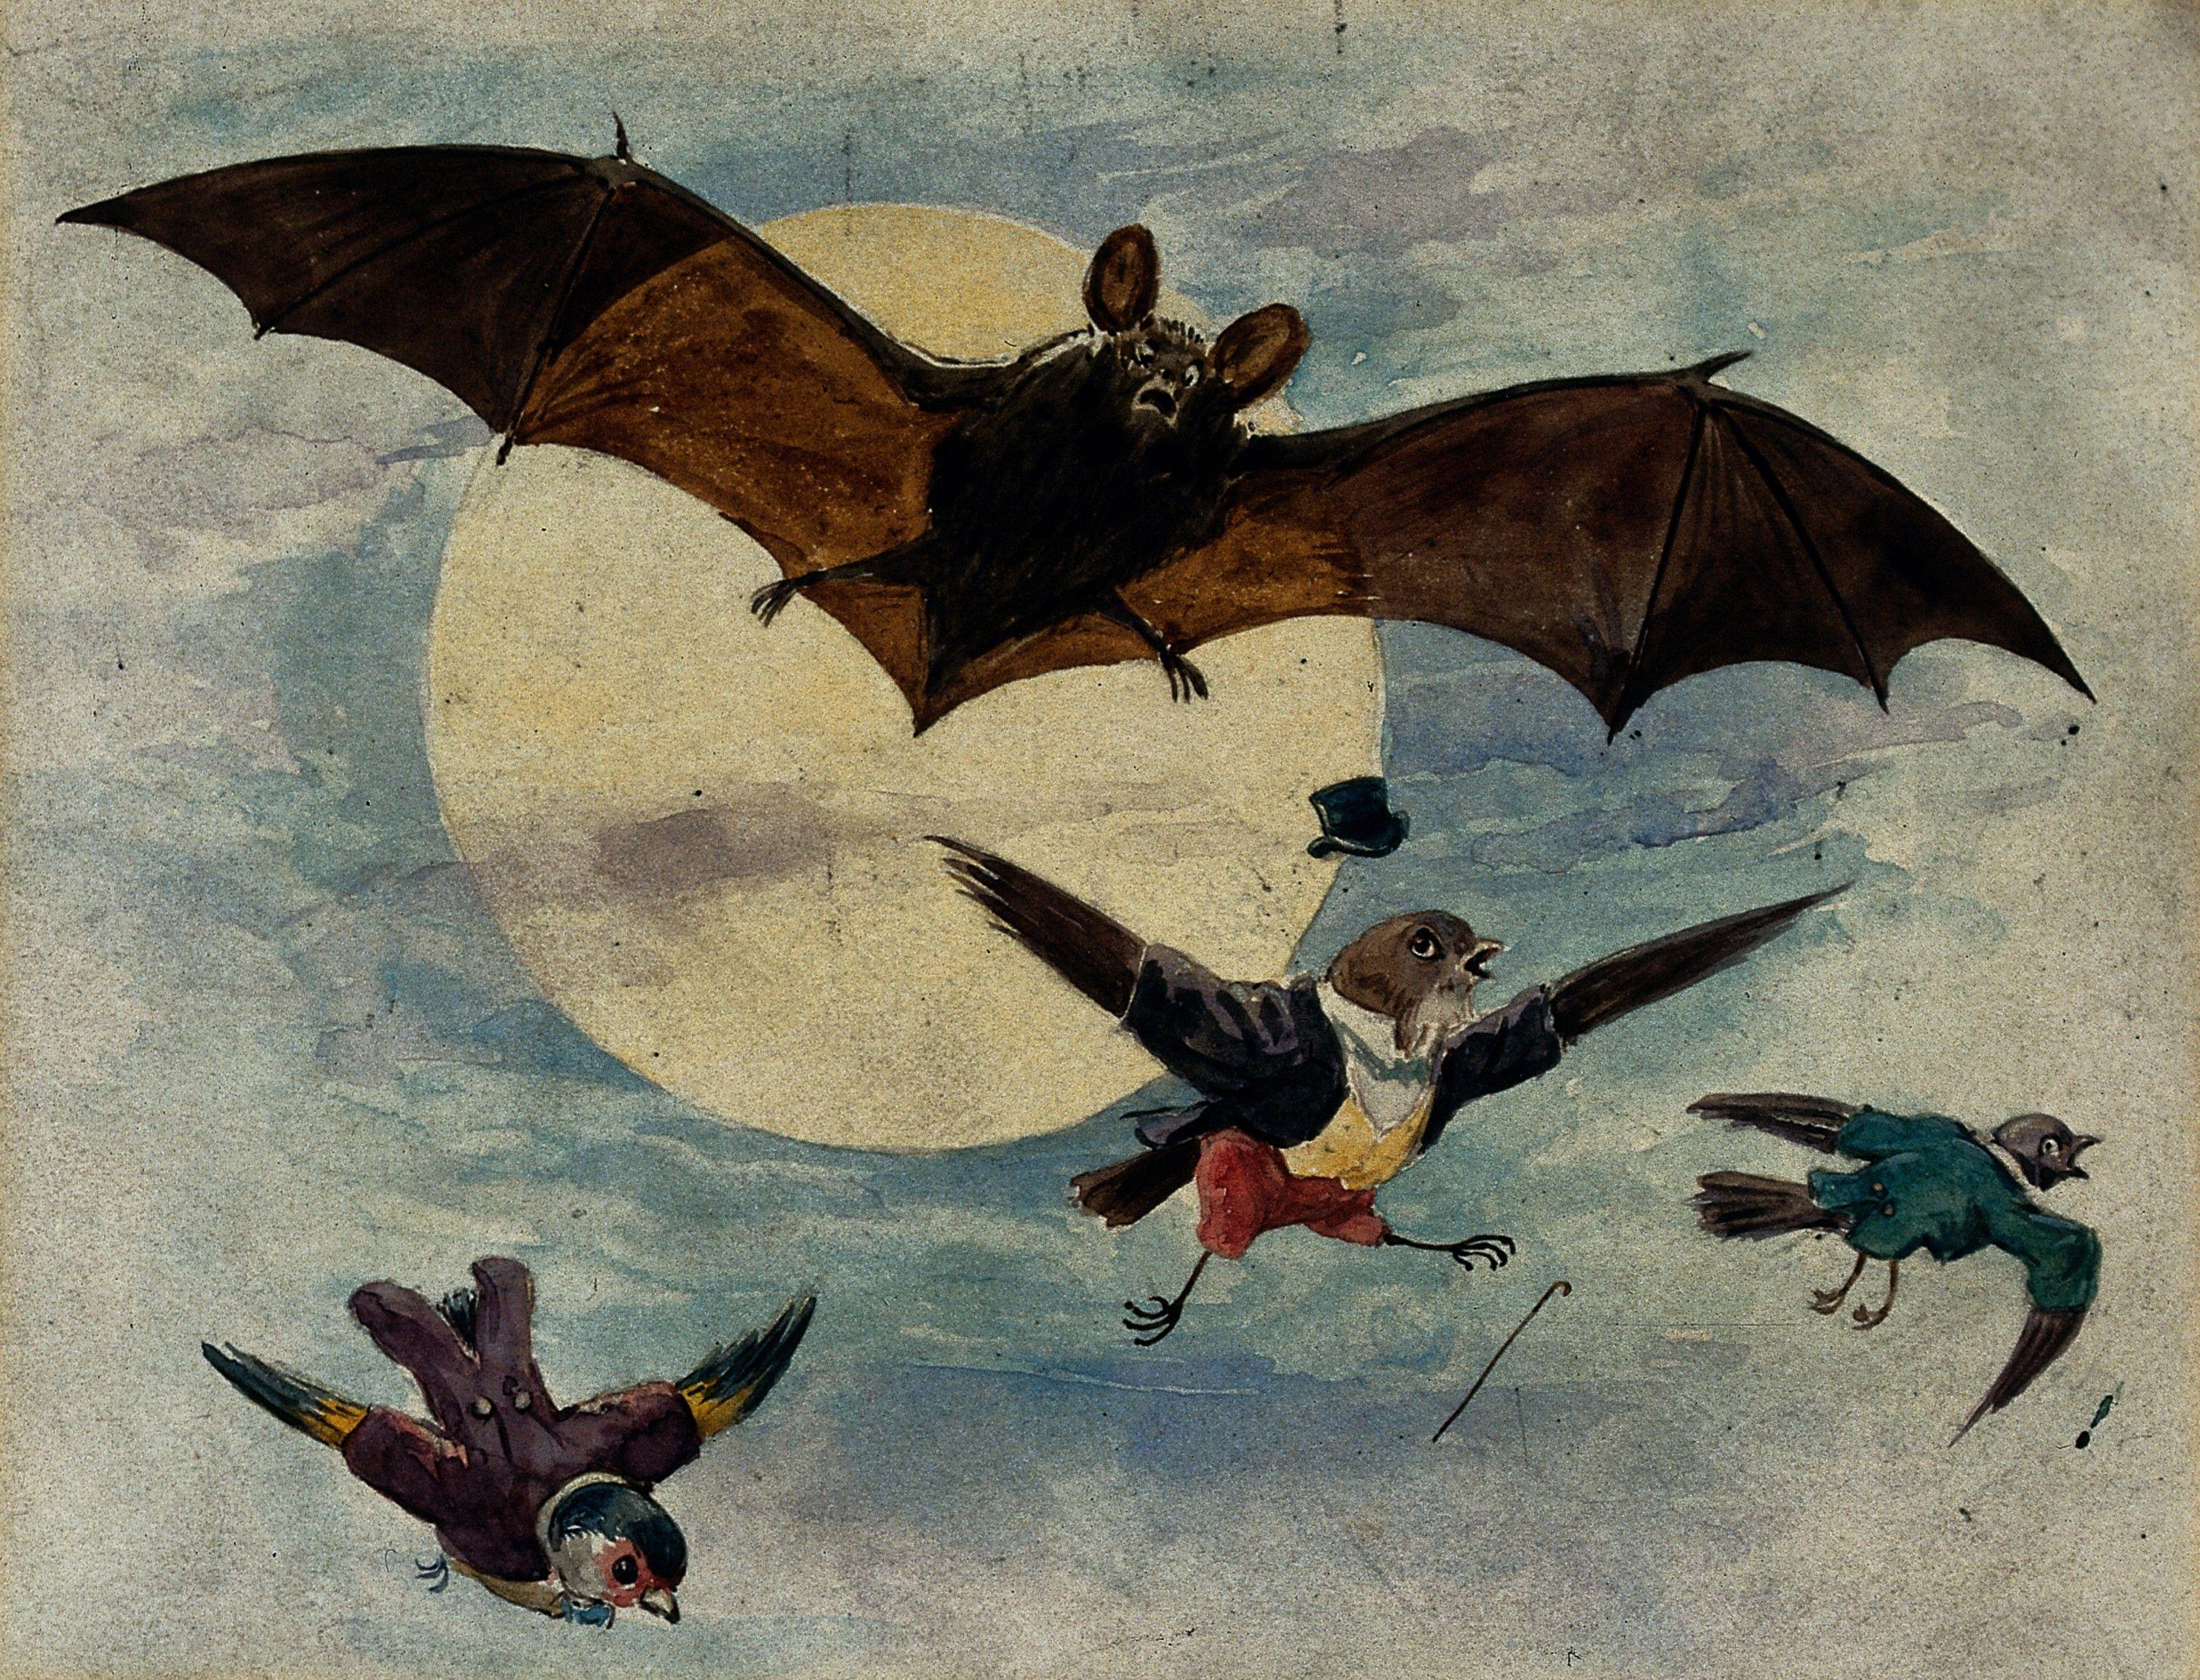 The Birds On Bat Logo - File:A bat and three fully dressed birds flying by moonlight ...